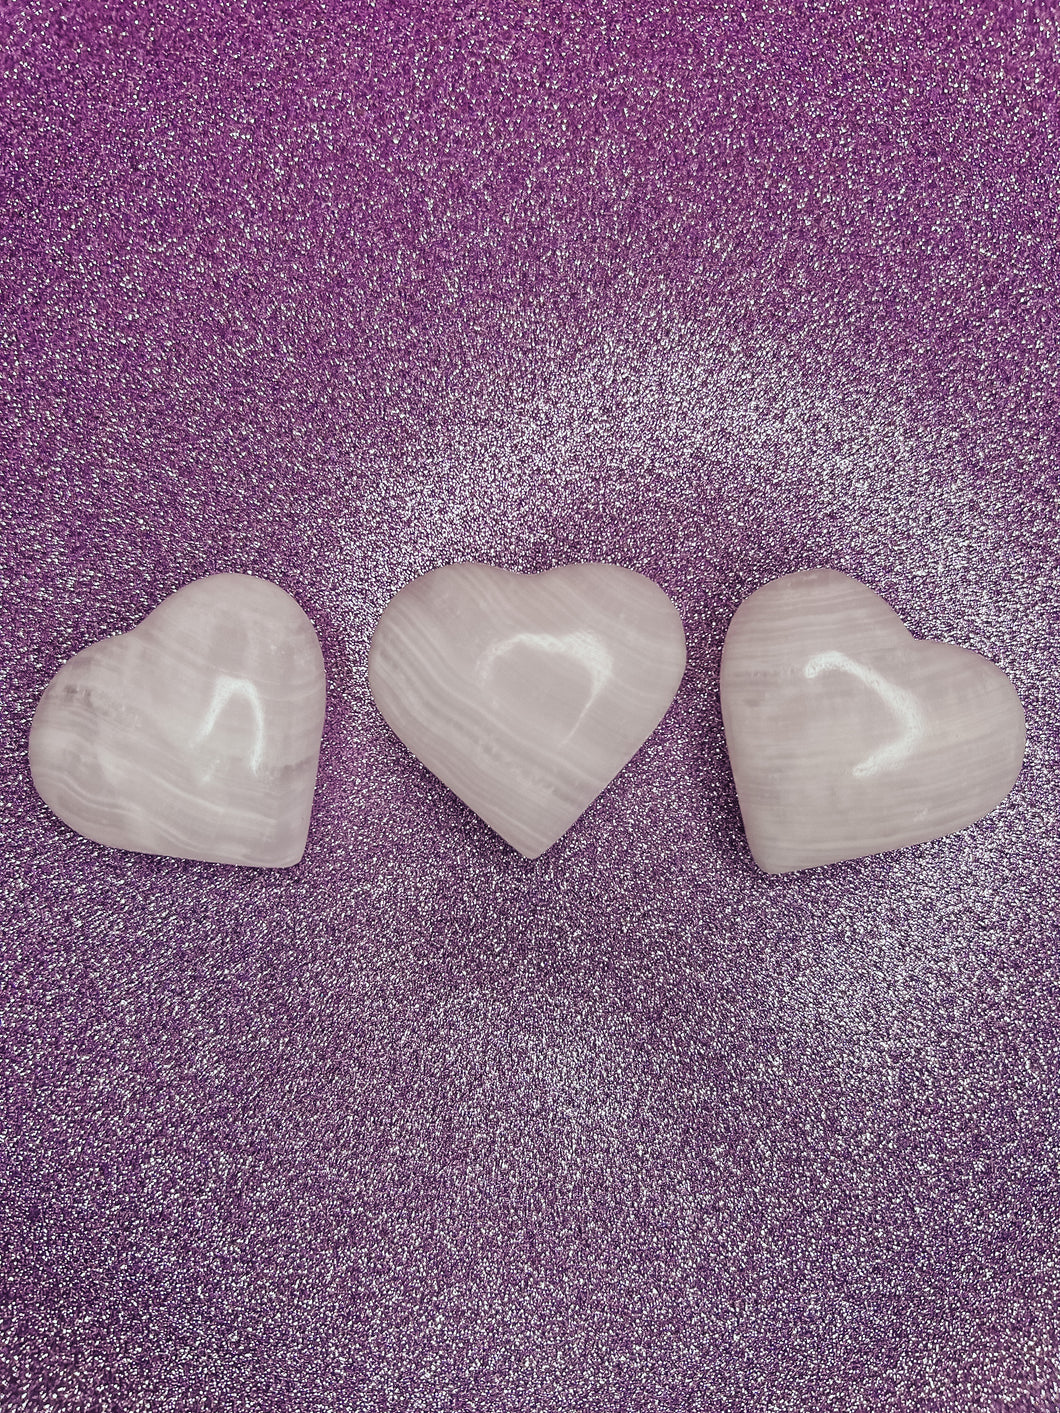 Pink Calcite Heart Shaped Palm Stones